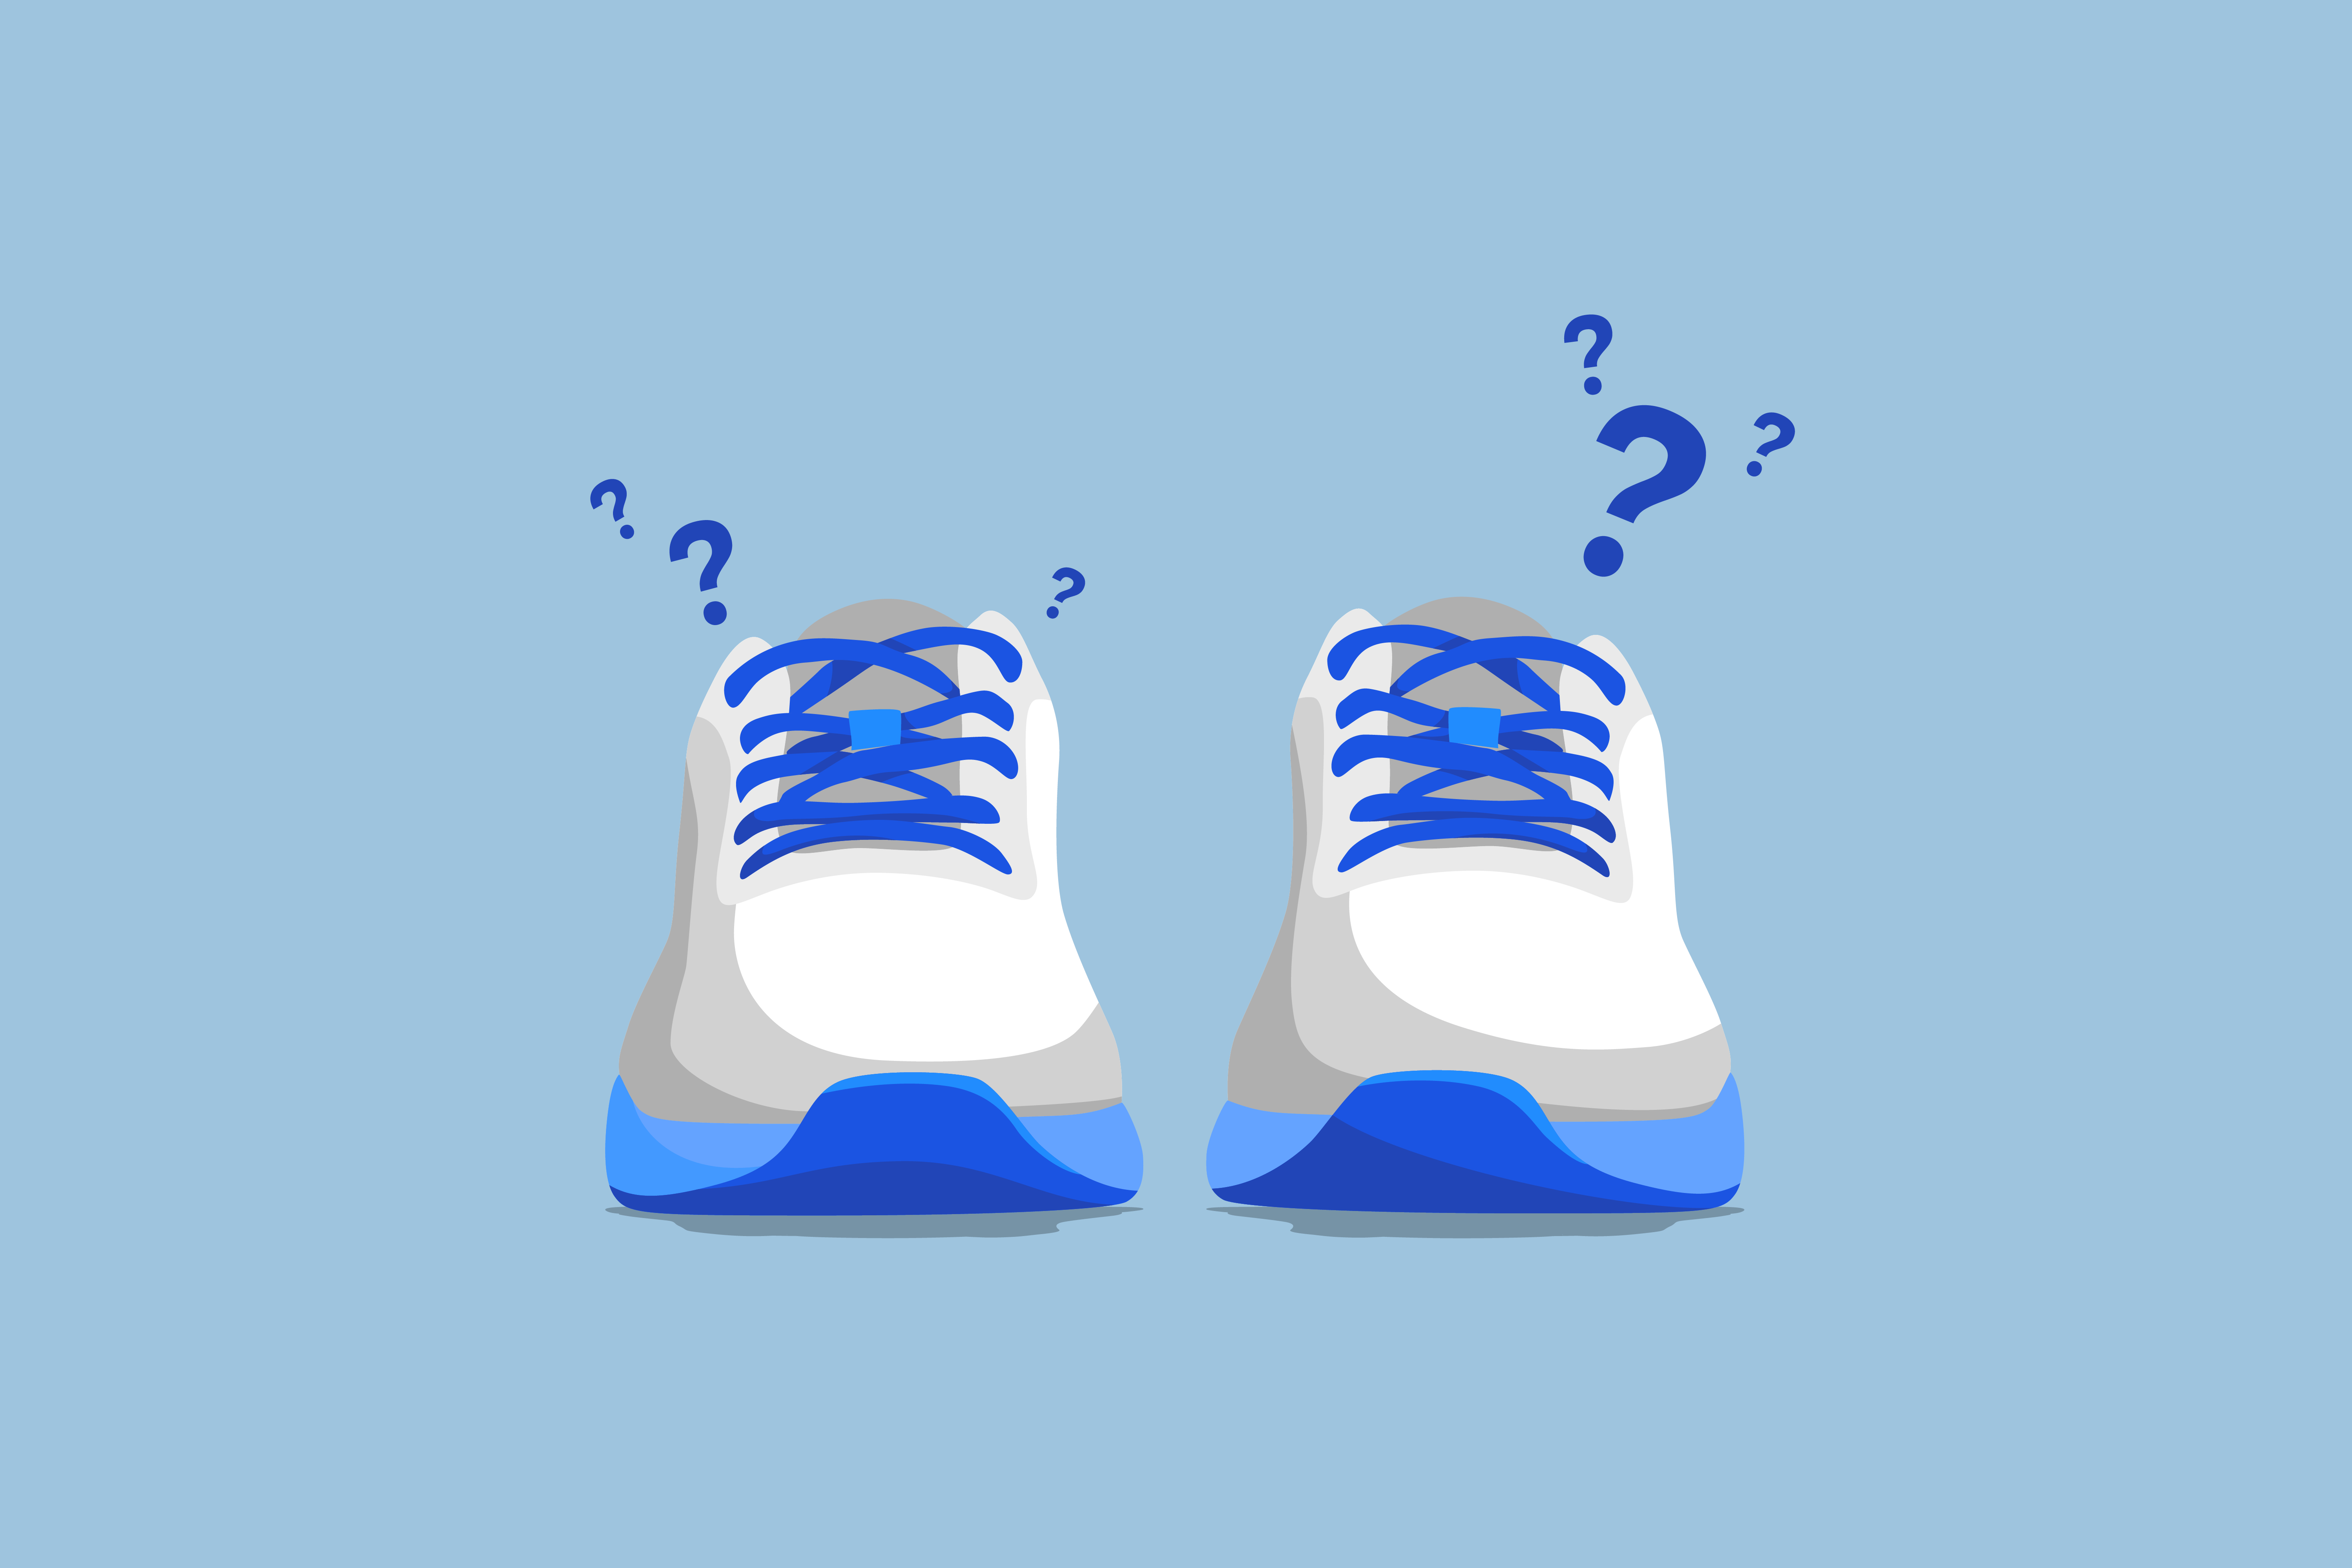 Sleeping with Shoes On: Is It Bad?